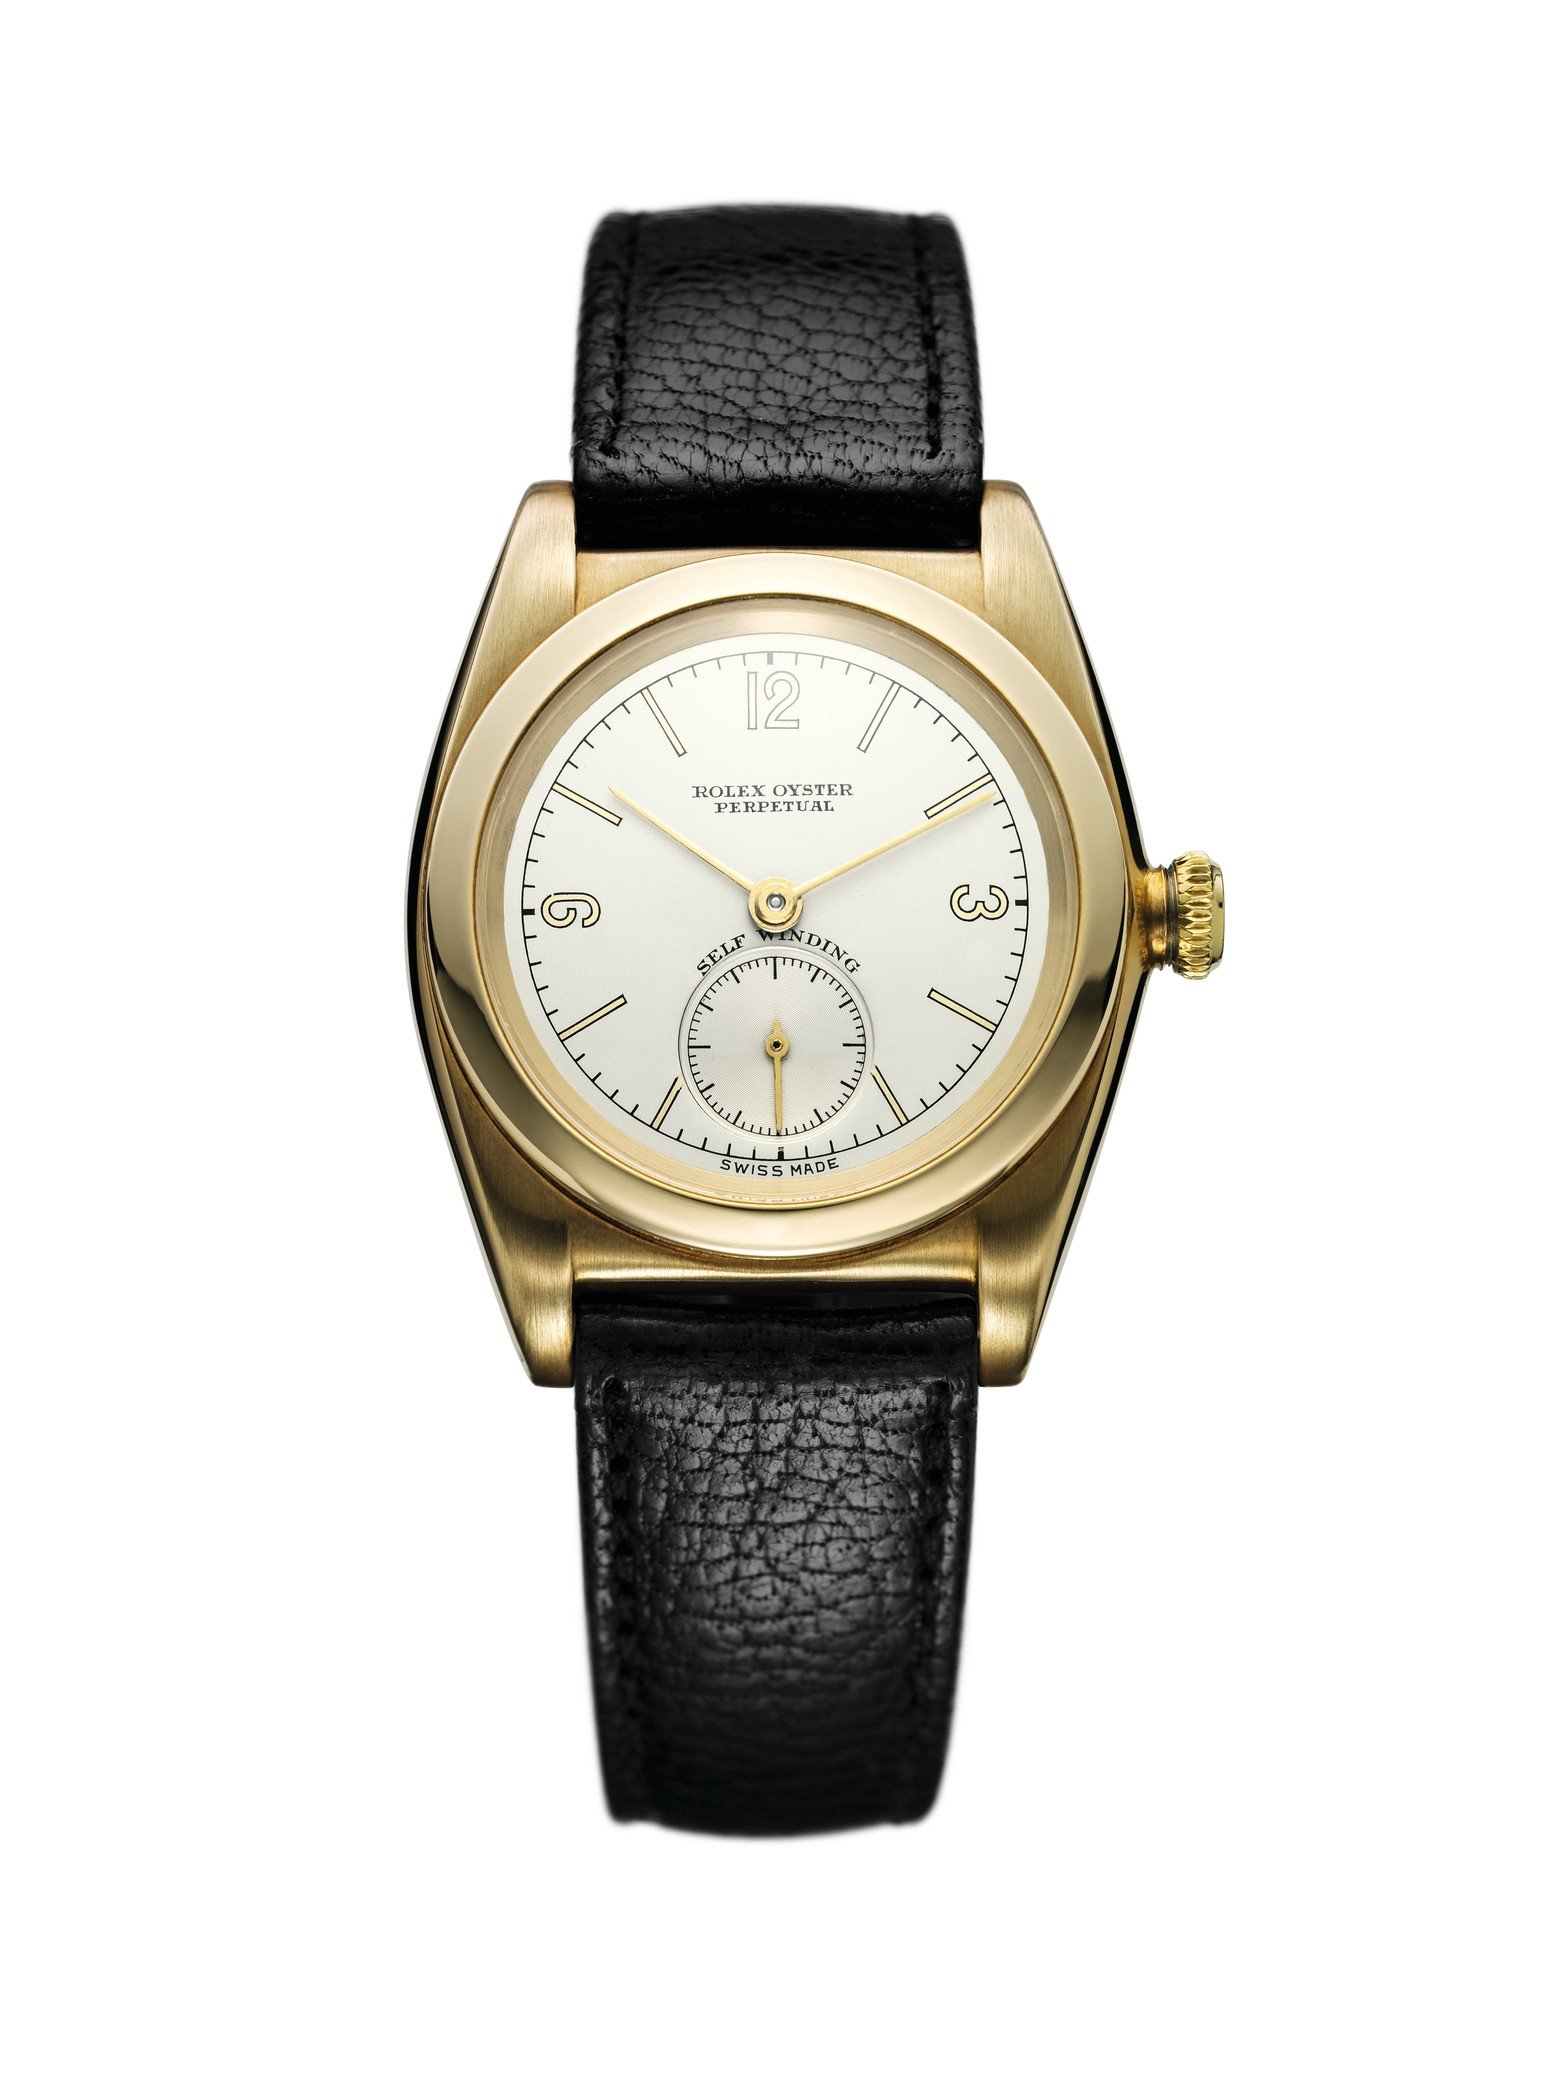 Erste Rolex Oyster Perpetual 1931